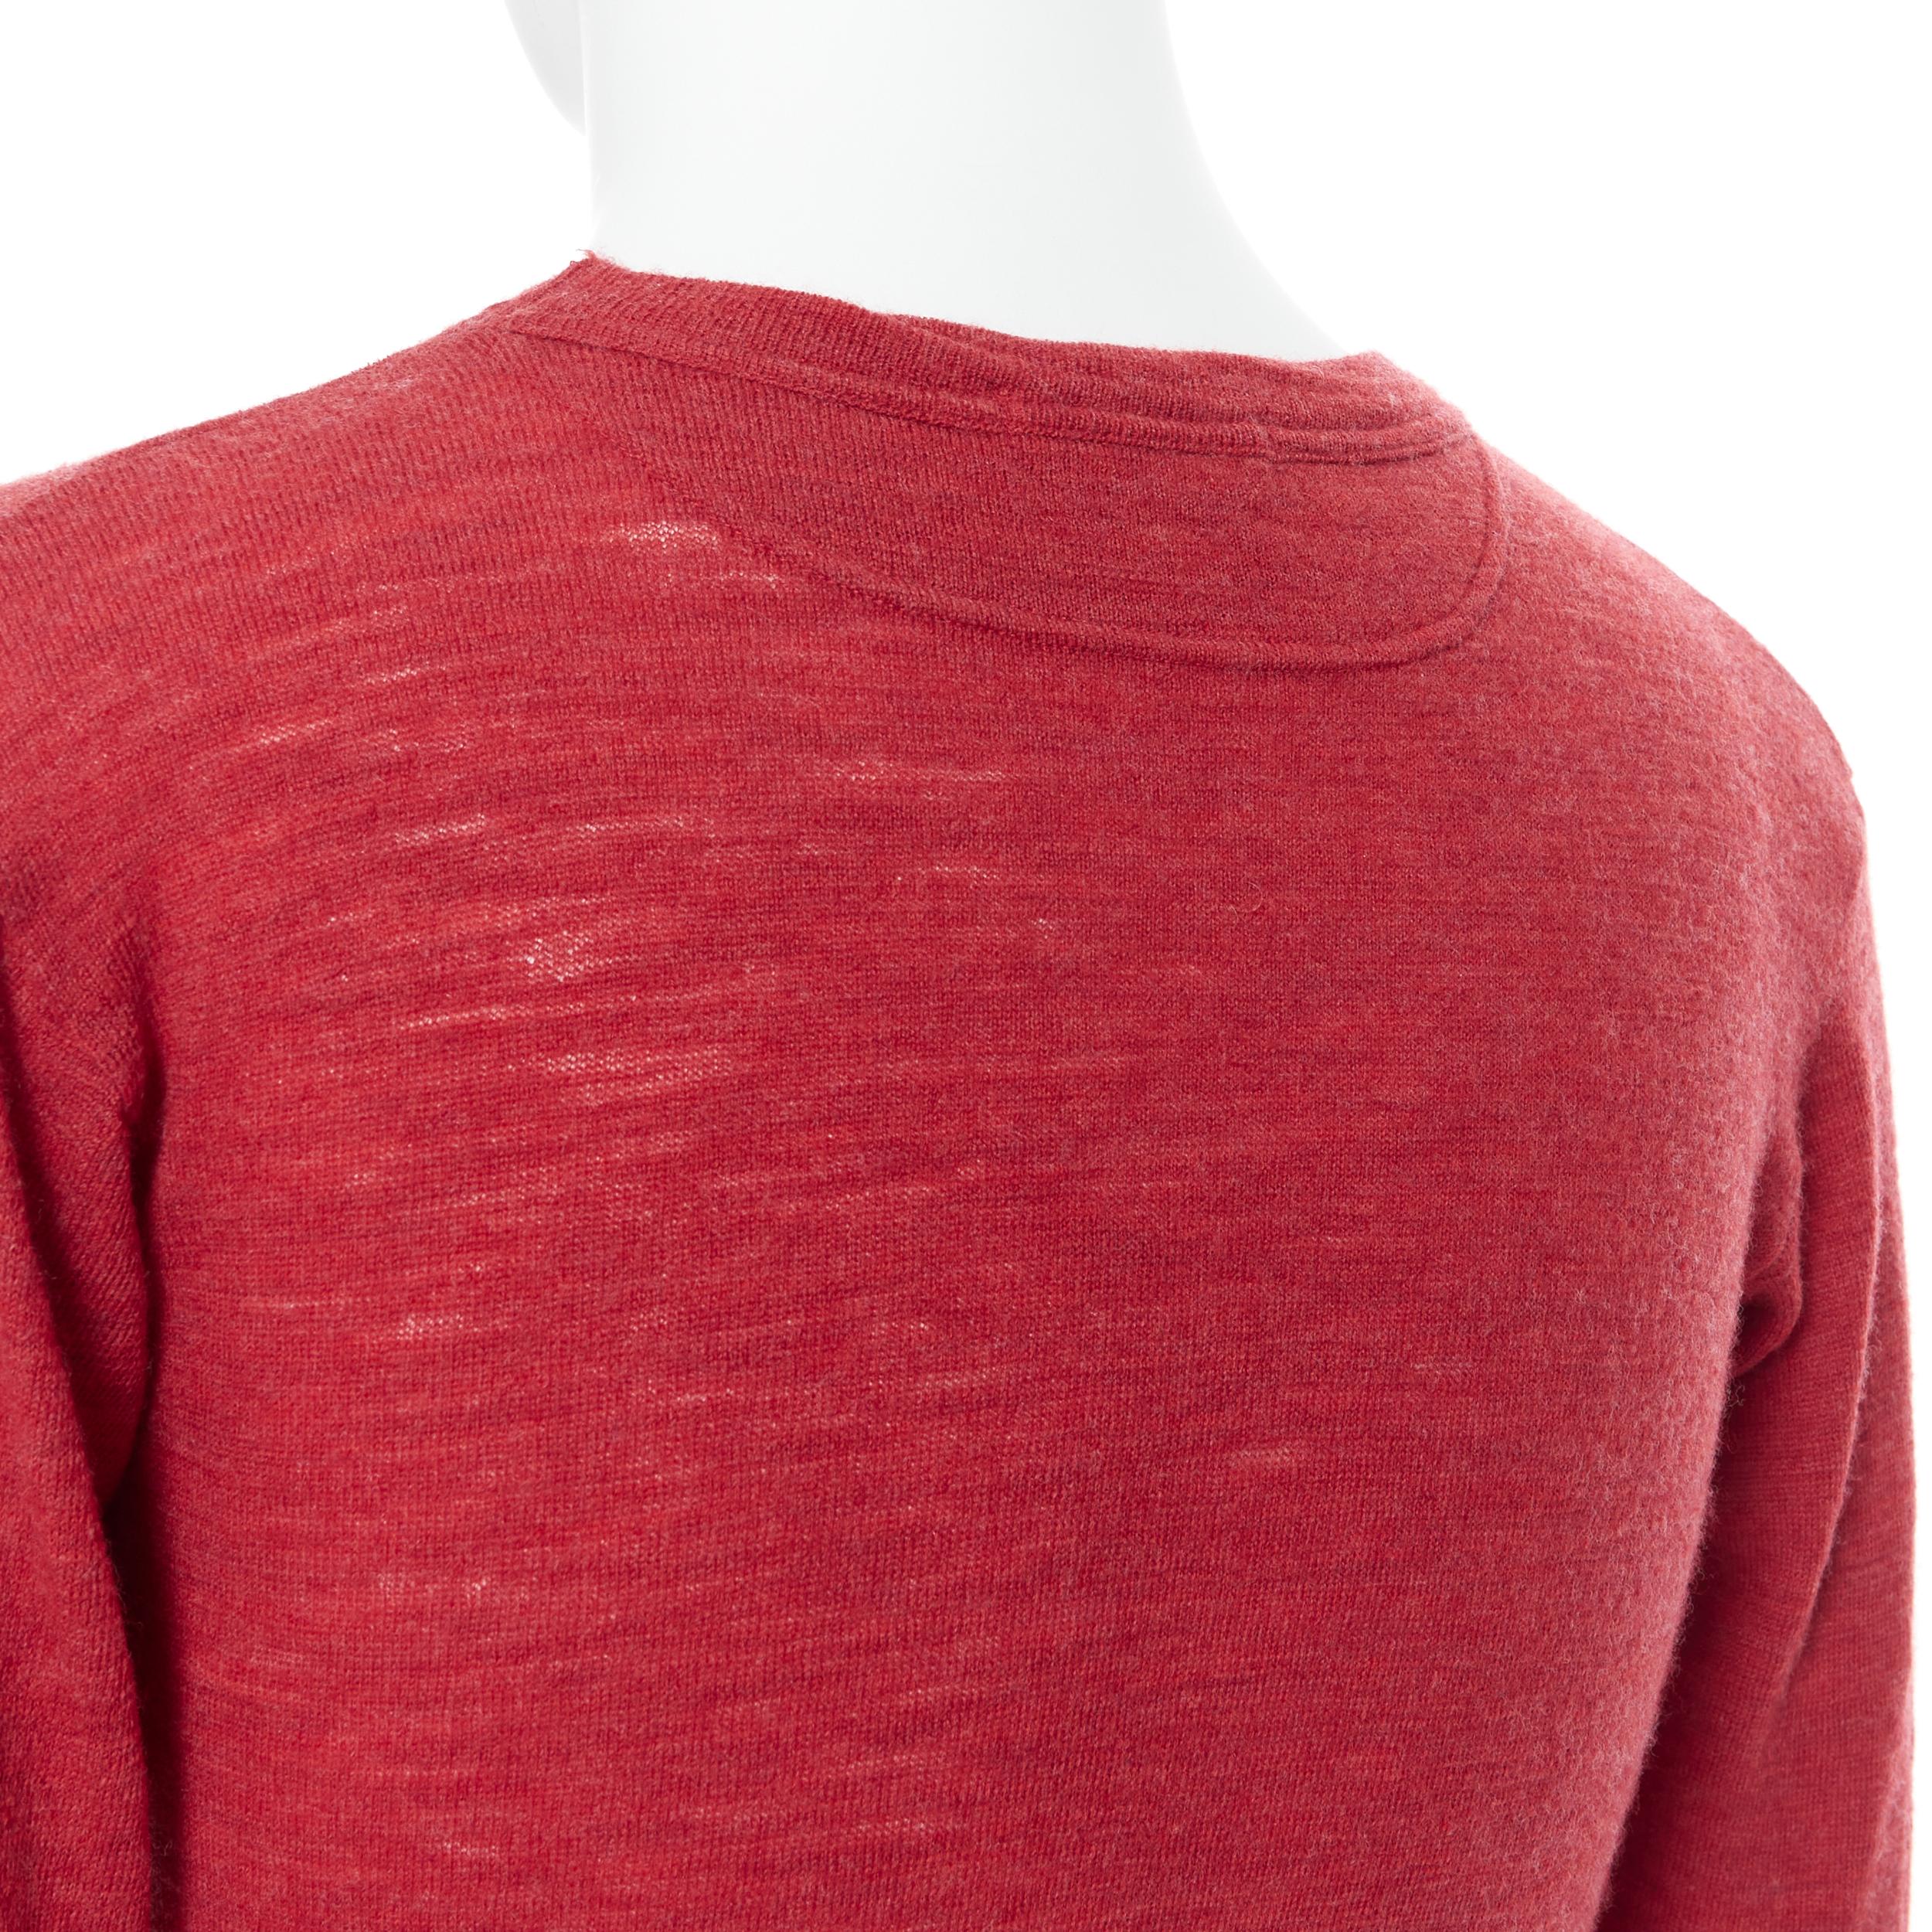 45R 100% wool red crew neck long sleeve pullover sweater Sz 3 M For Sale 2